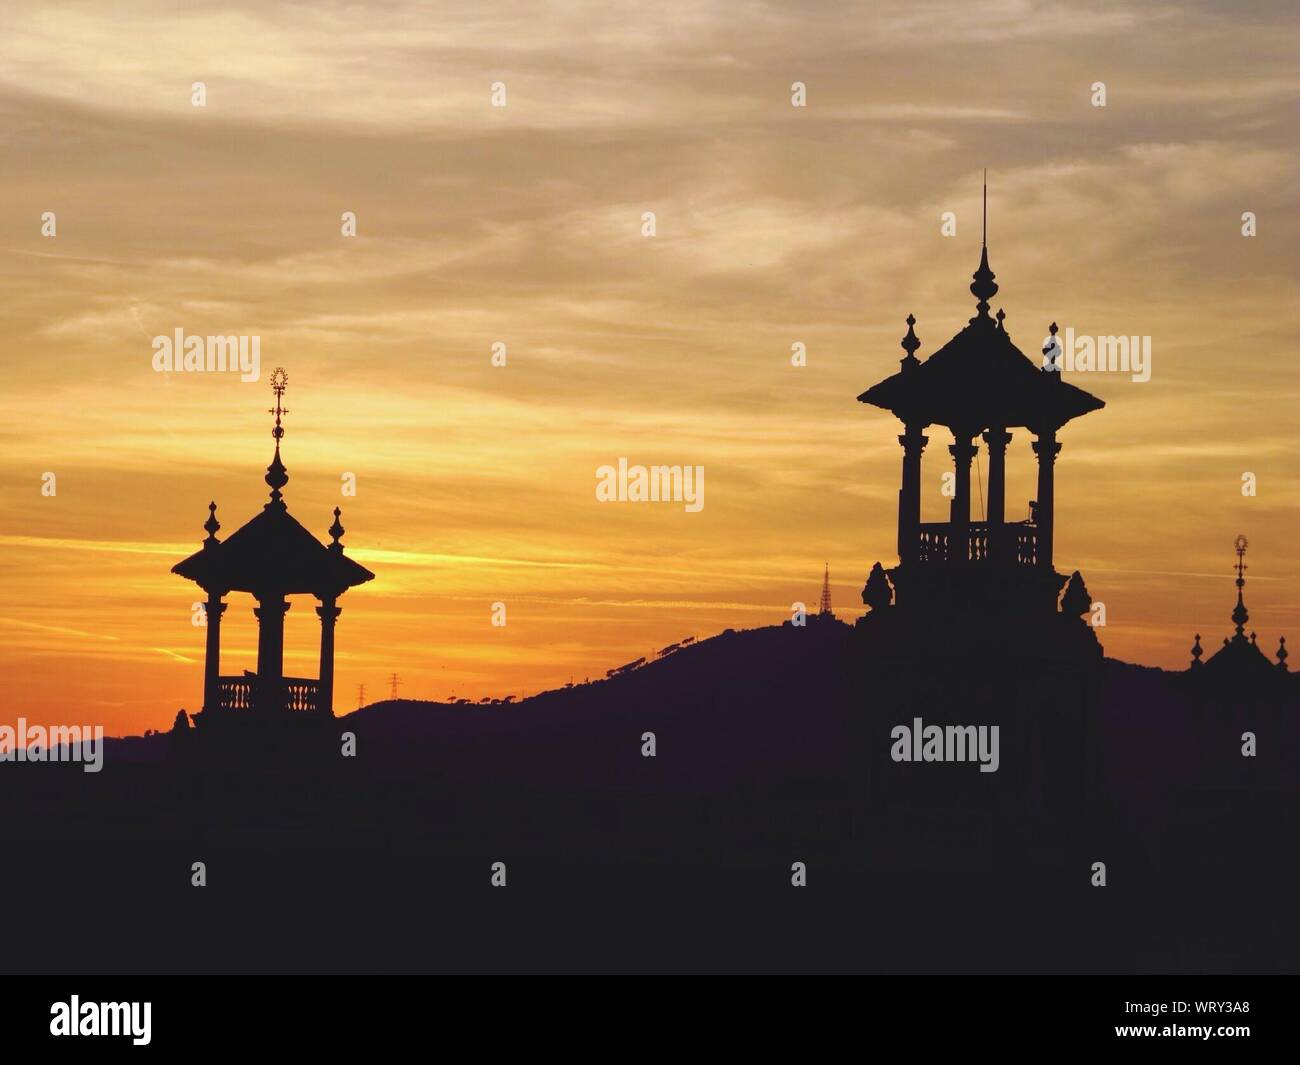 Silhouette Traditional Architectures Against Cloudy Sky During Sunset Stock Photo